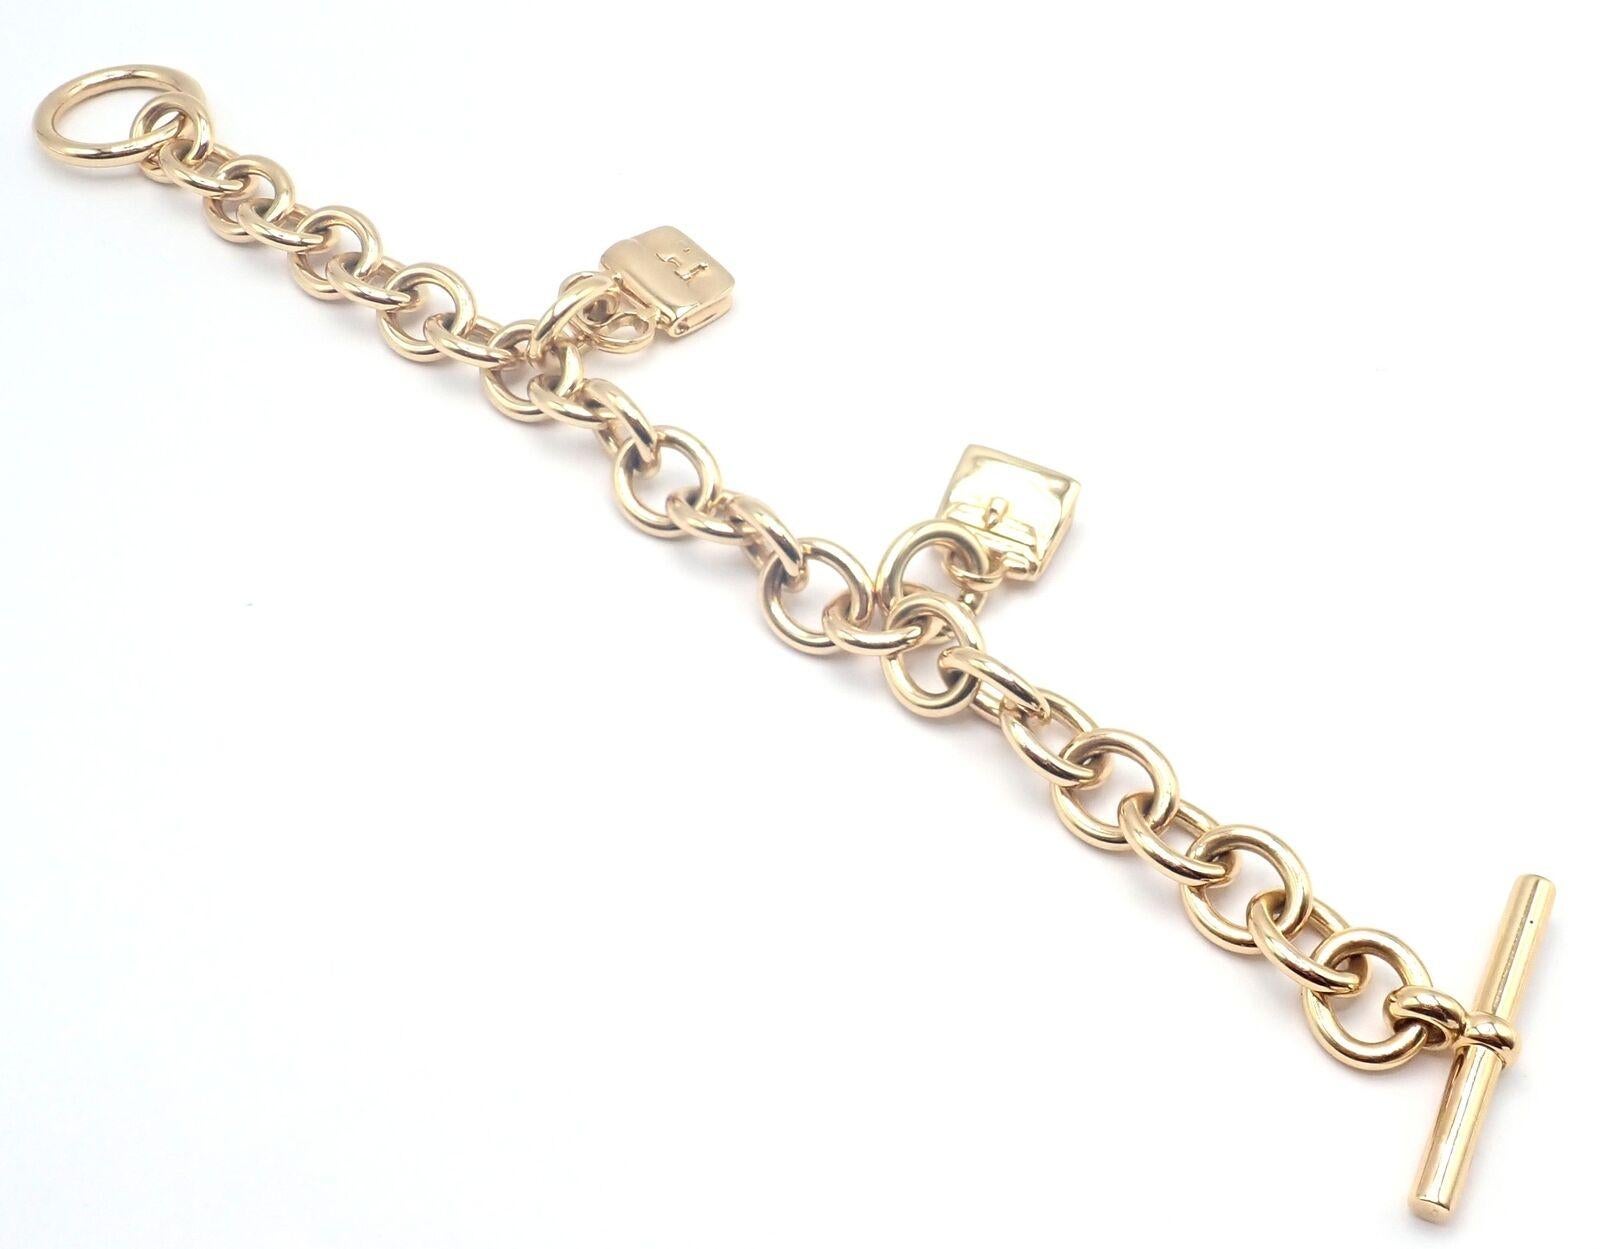 Hermes Heavy Link Toggle With Two Hanging Bag Charms Yellow Gold Bracelet For Sale 4